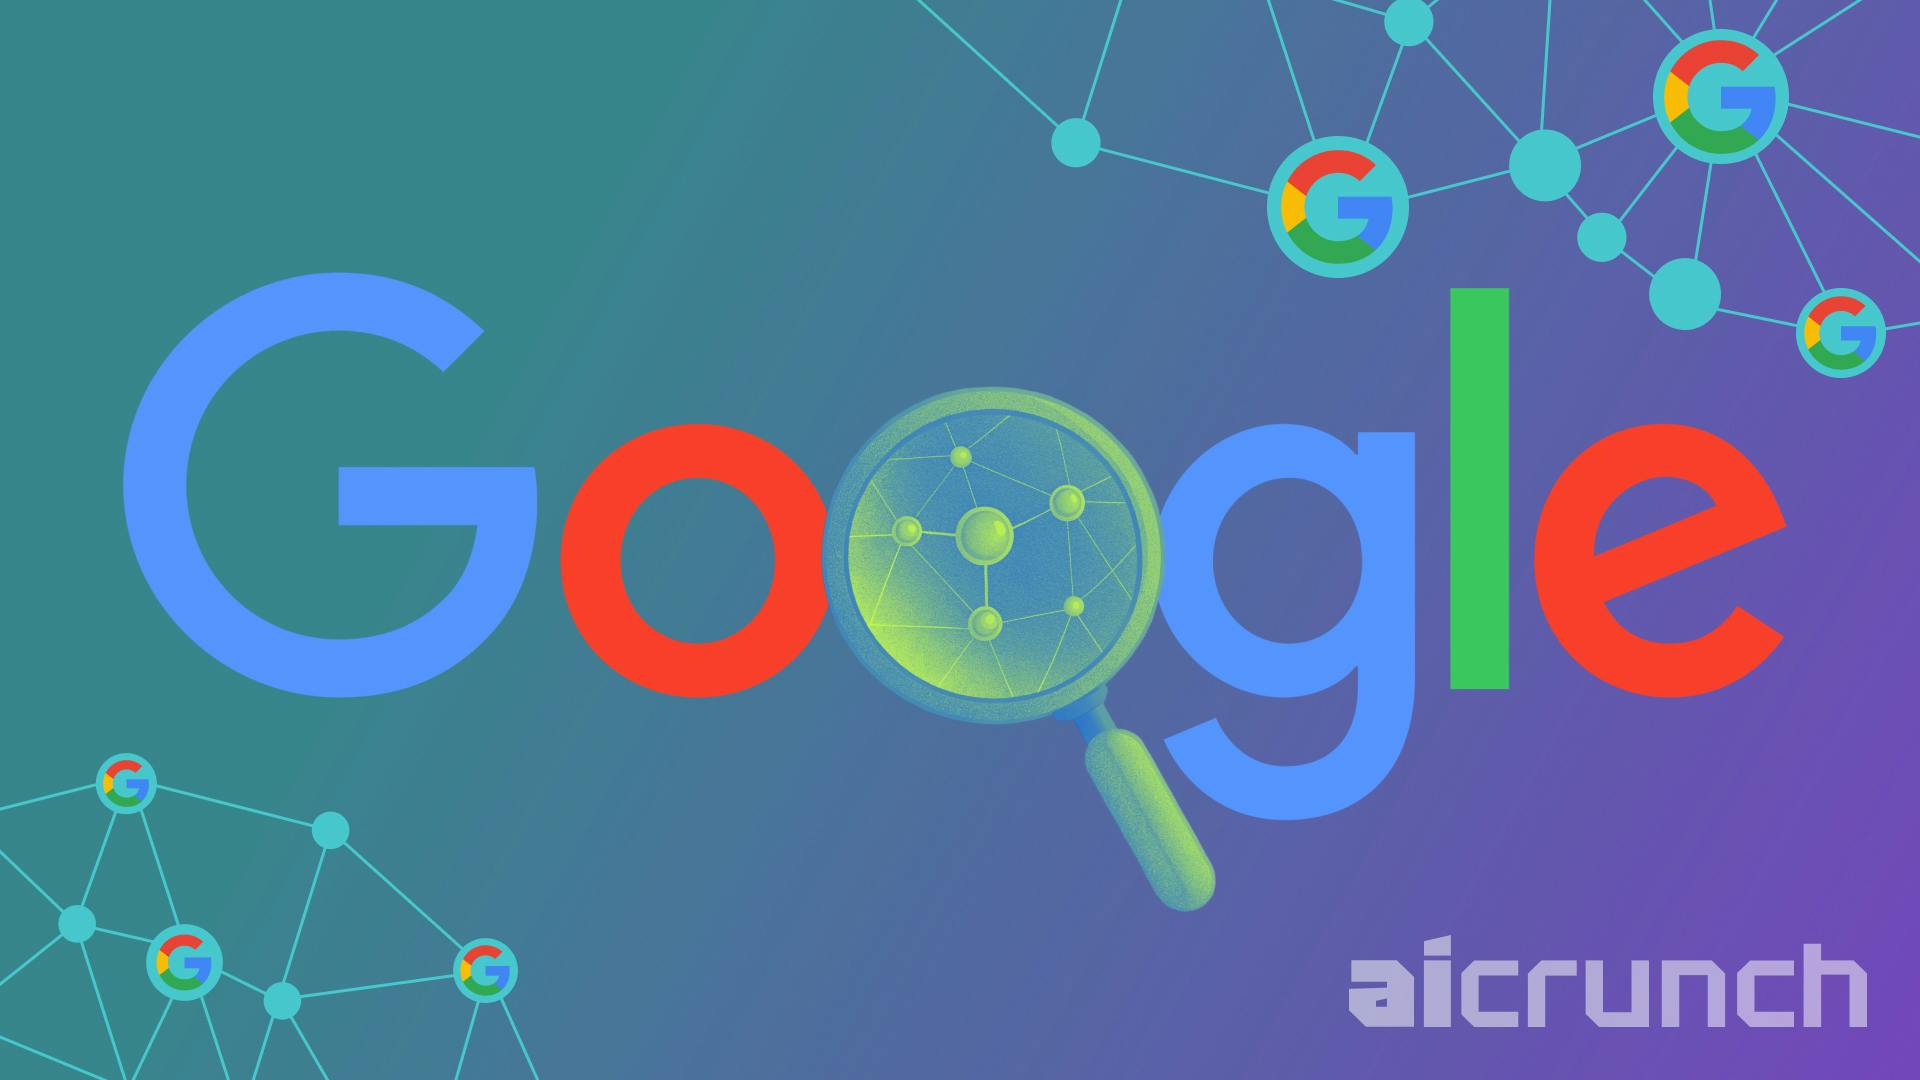 Guide to Google Search AI: How to Turn On and Use Google Search AI Tools